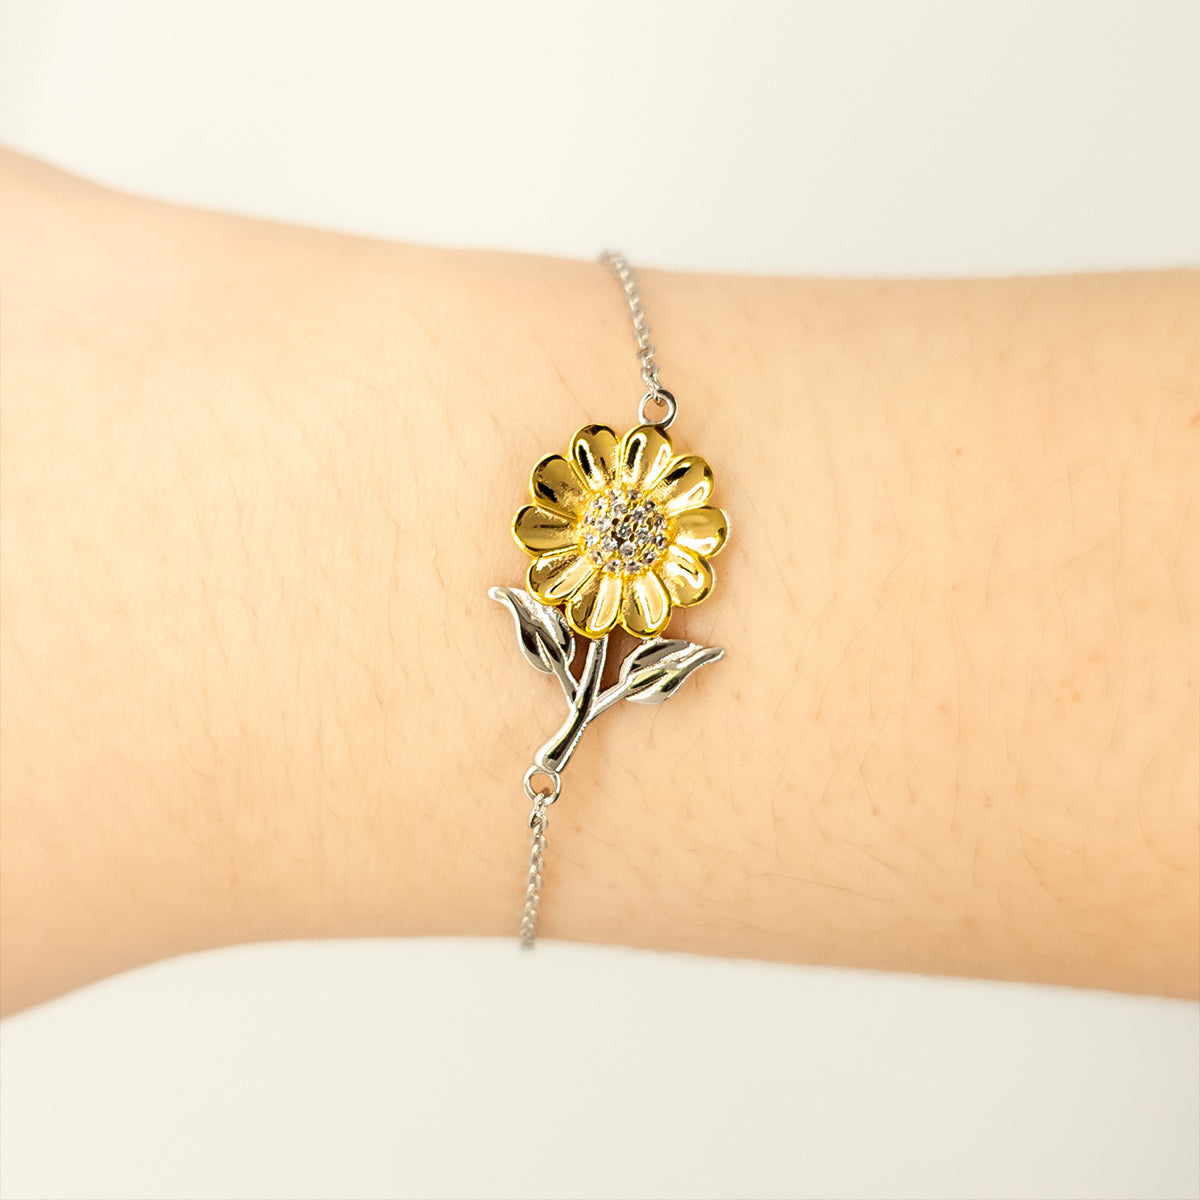 Grandma Sunflower Bracelet - A Perfect Gift to Show Love and Appreciation, Special Occasion, Inspirational Jewelry for Grandma